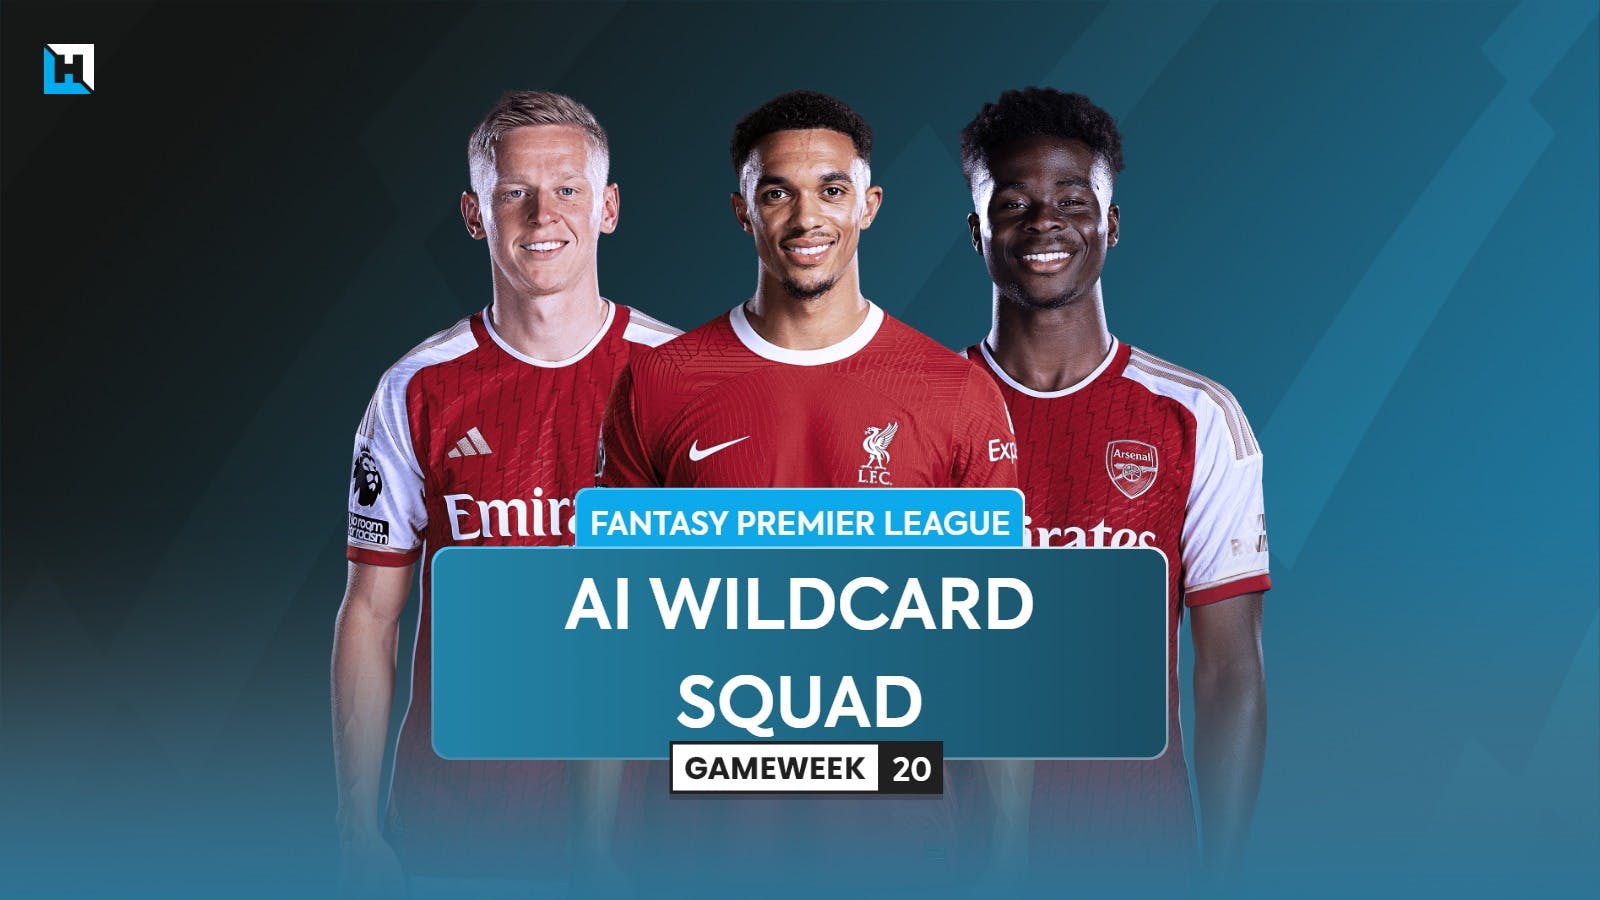 The best FPL Wildcard team for Gameweek 20 according to AI